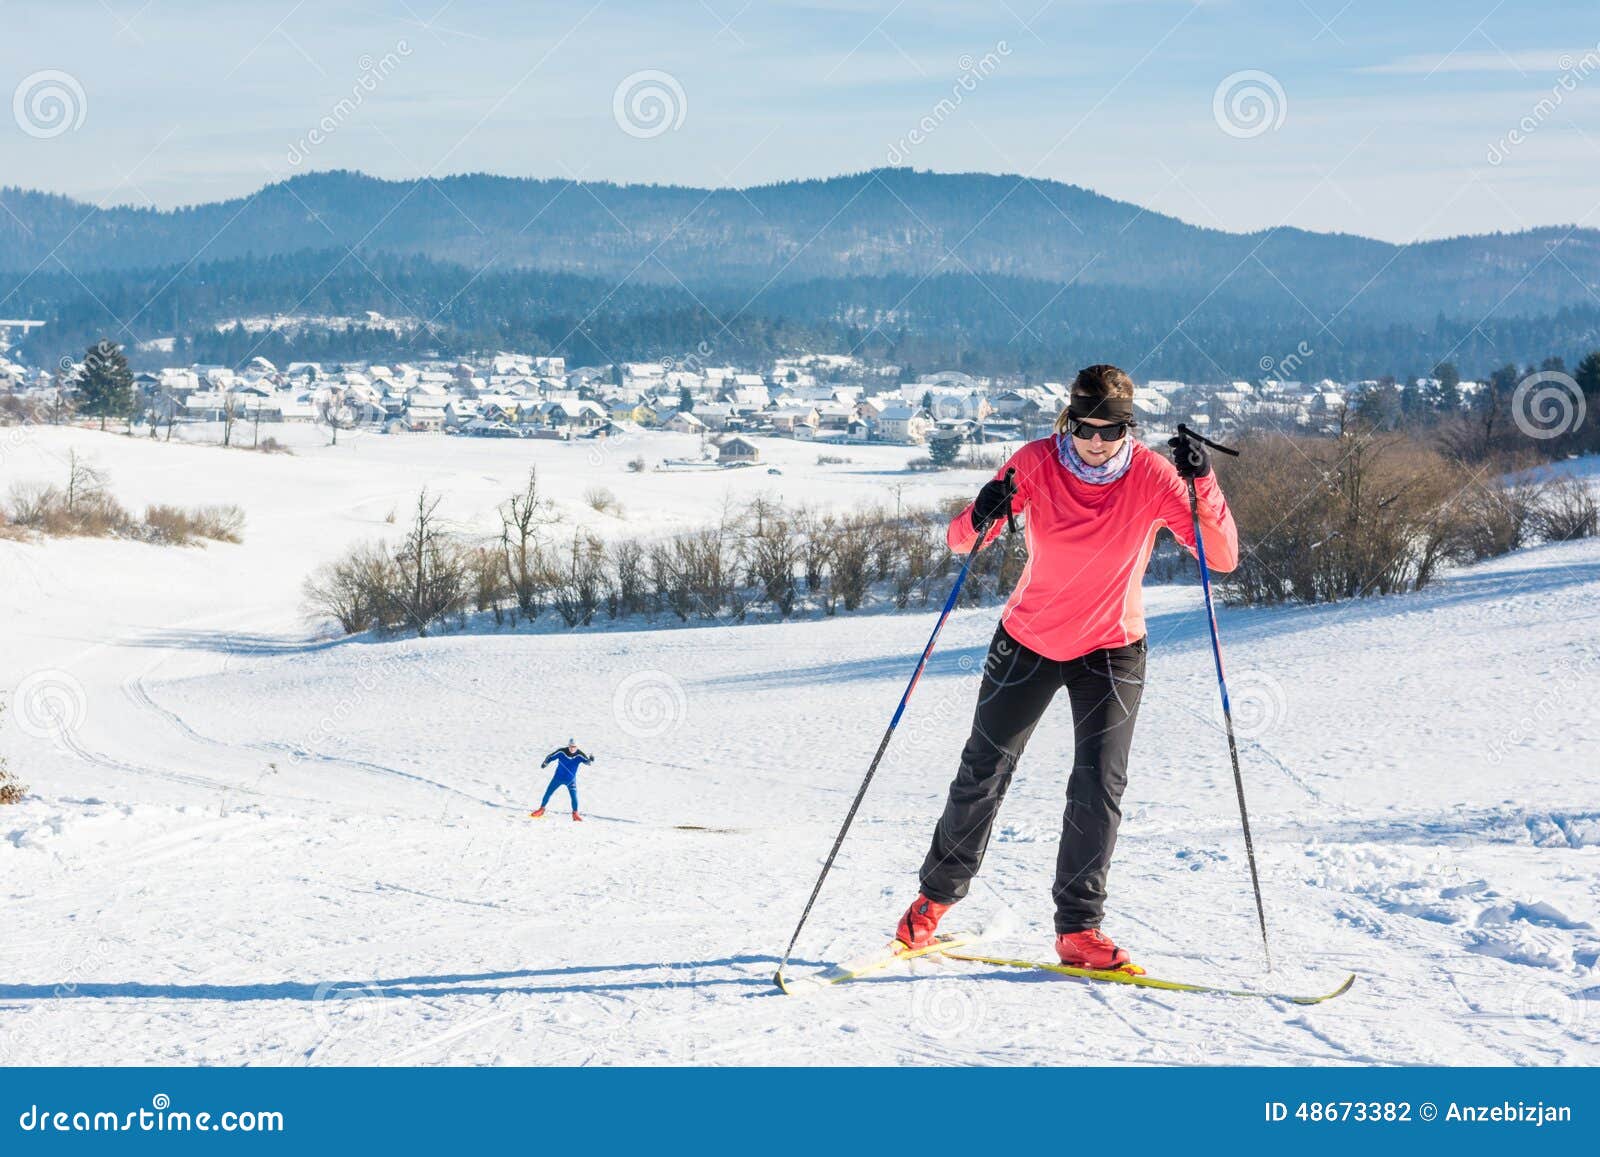 Cross country skier stock photo. Image of skiing, temperature - 48673382